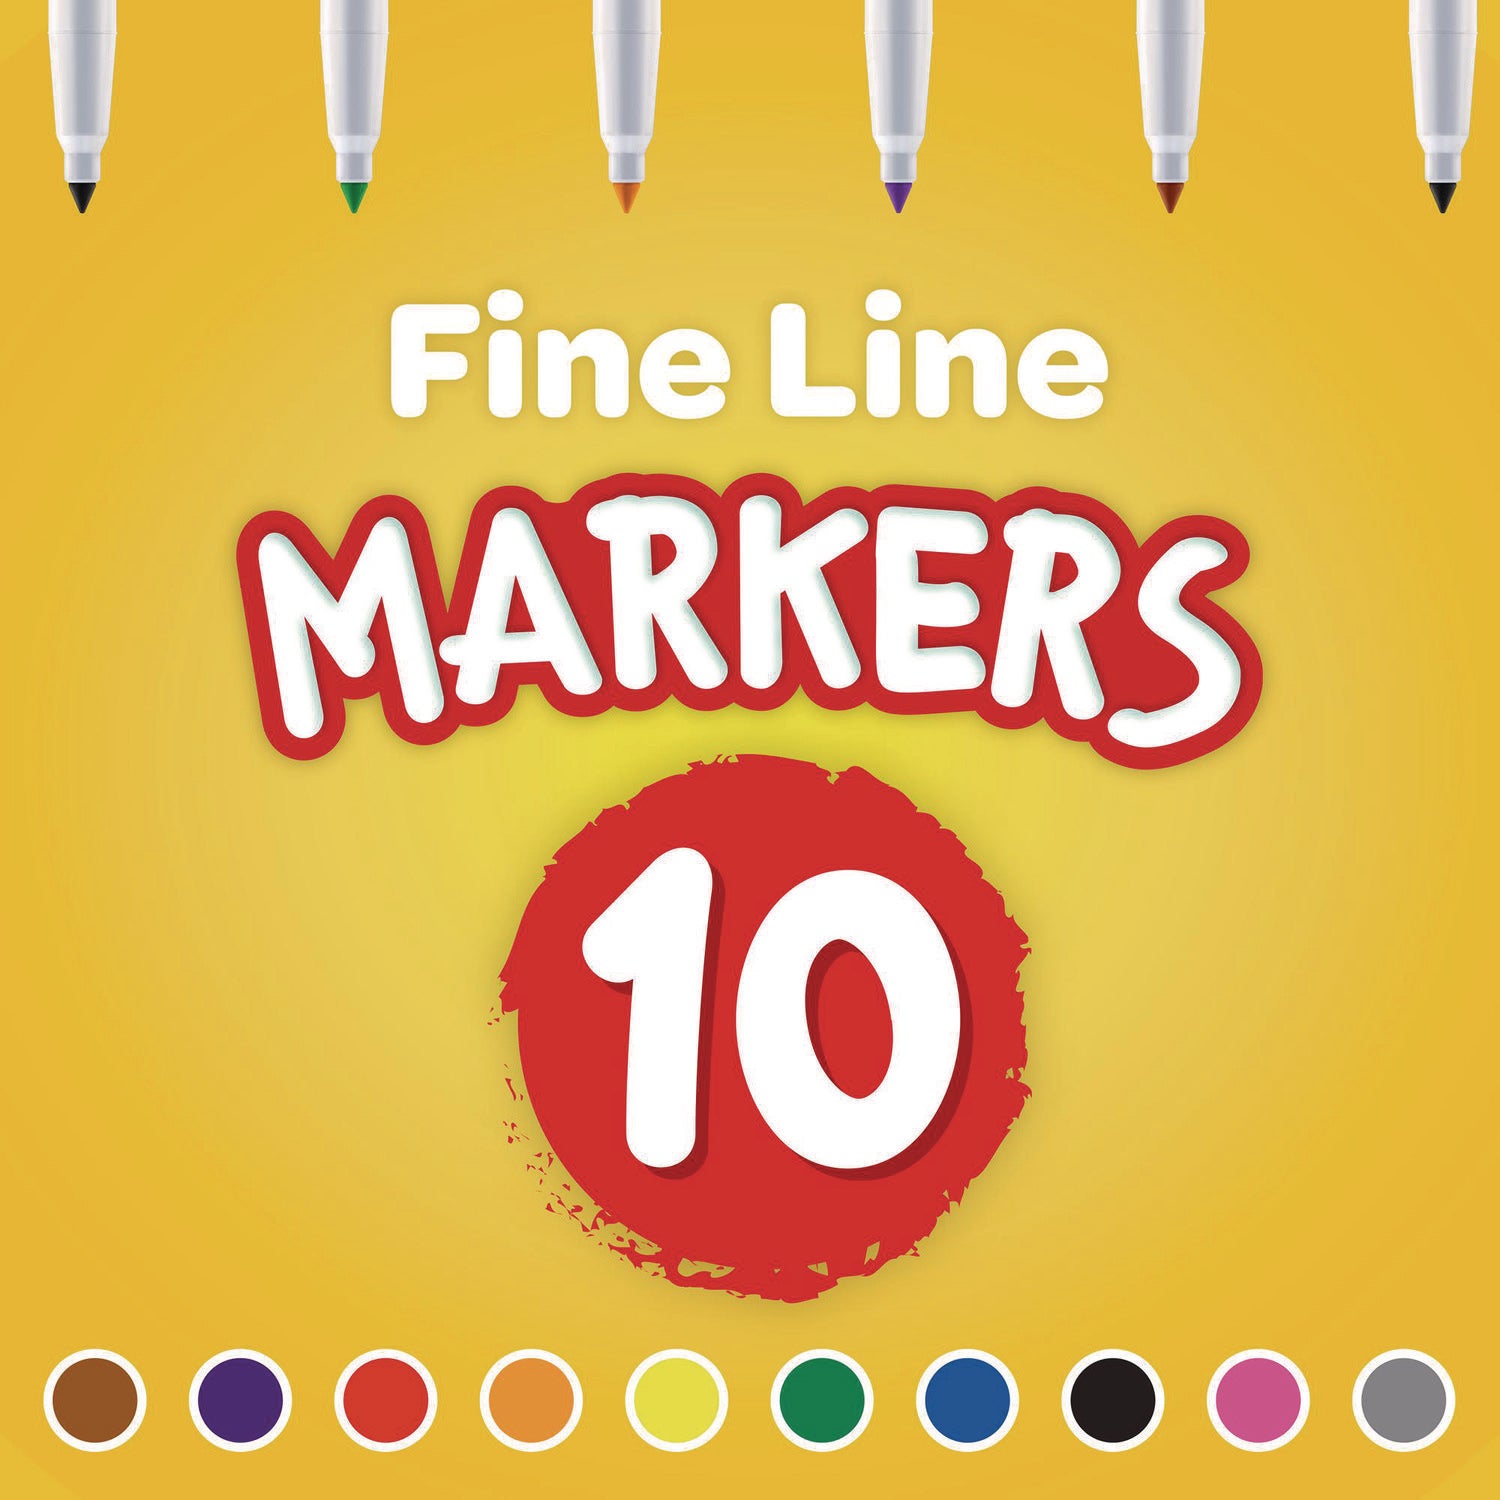 NON-WASHABLE MARKER, FINE BULLET TIP, ASSORTED CLASSIC COLORS, 10/PACK - 3